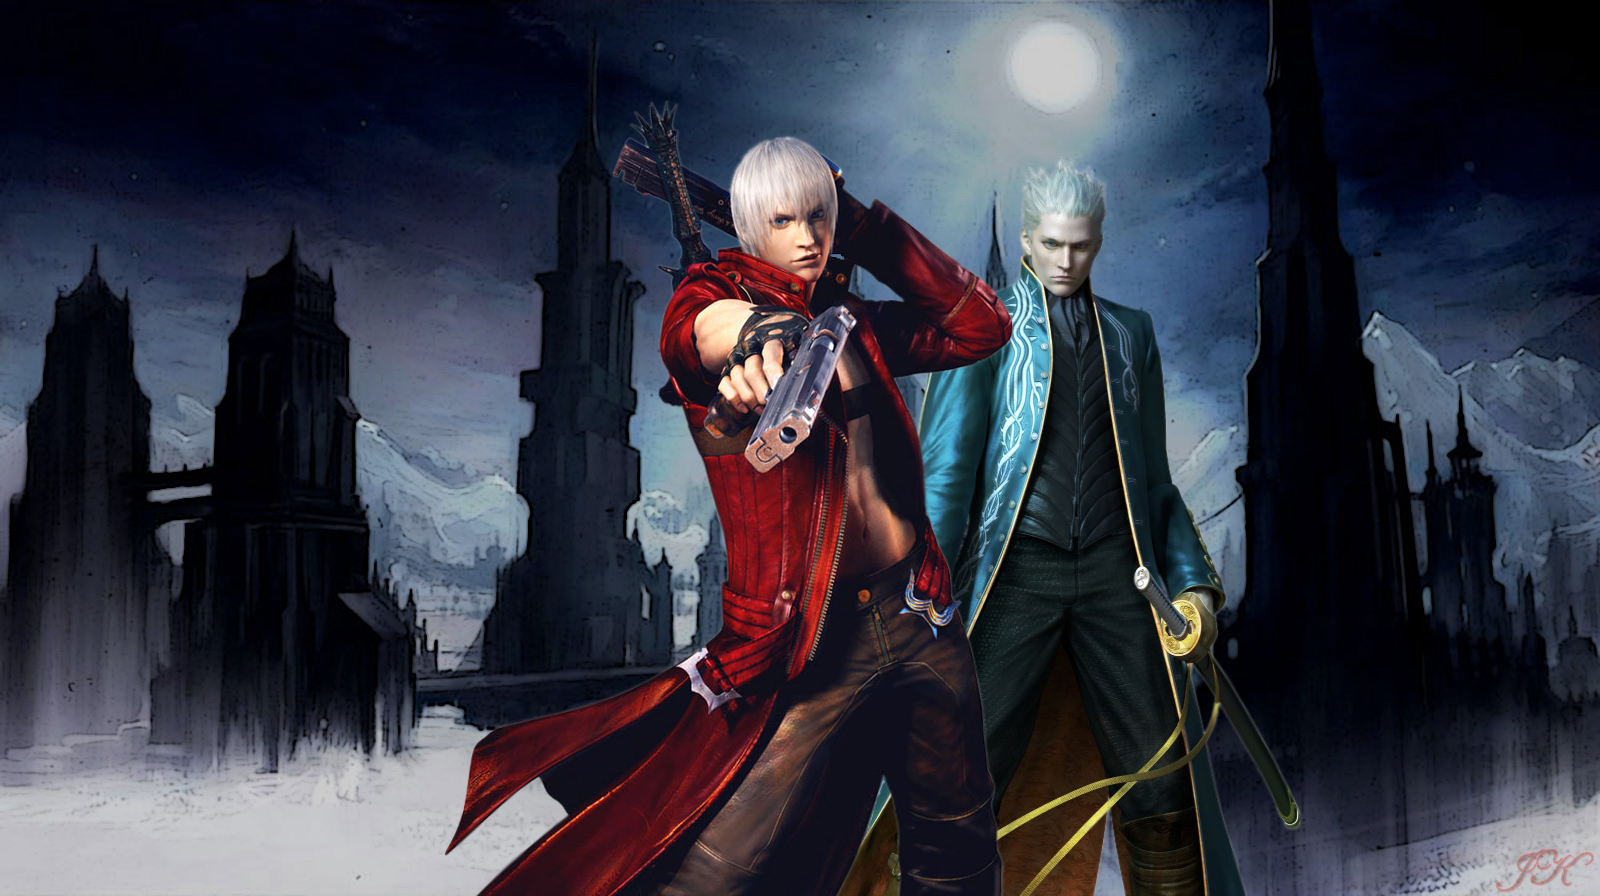 DmC Devil May Cry Twin brothers by SyanArt